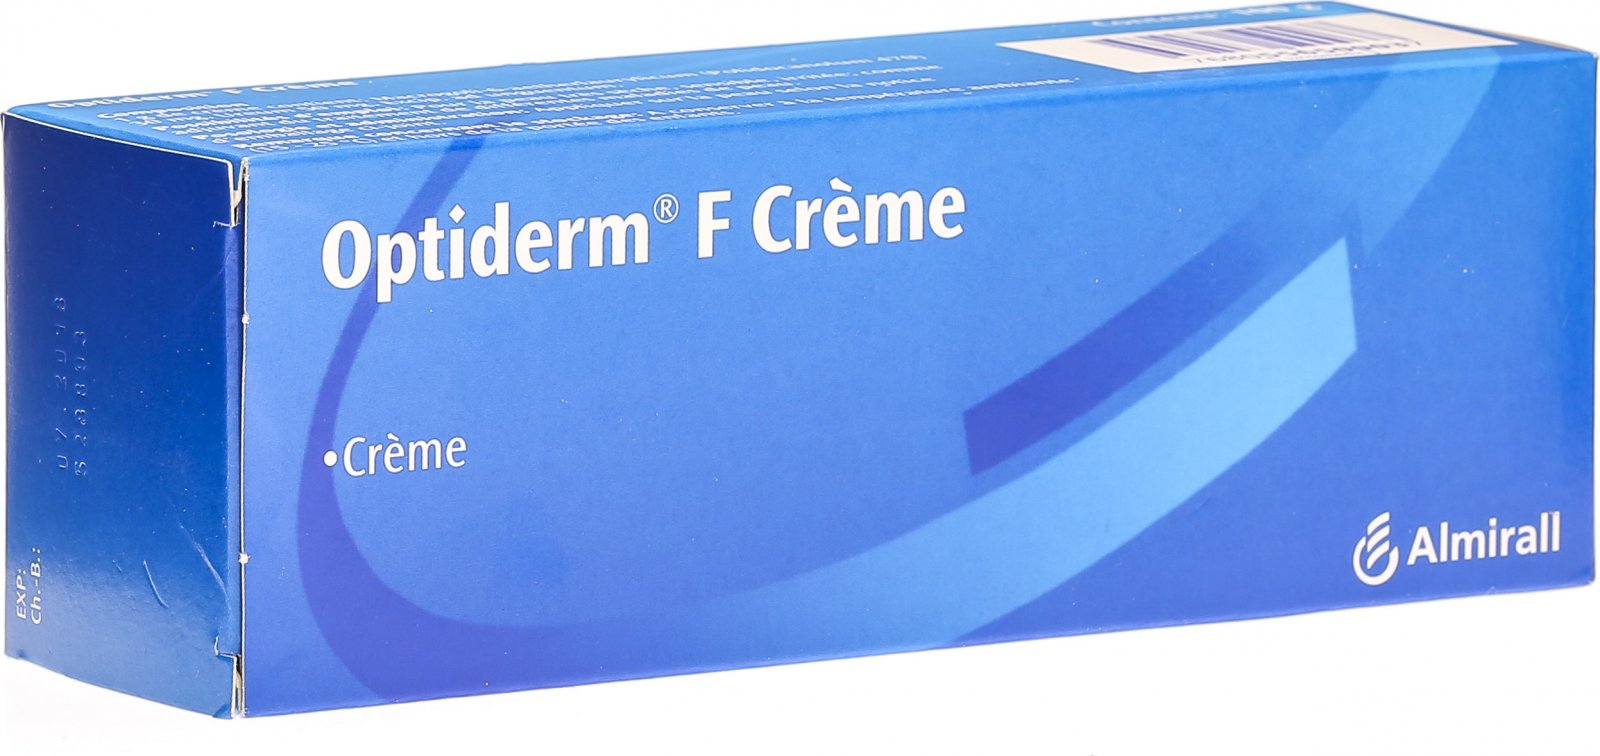 View larger picture of Optiderm F Creme 100g 